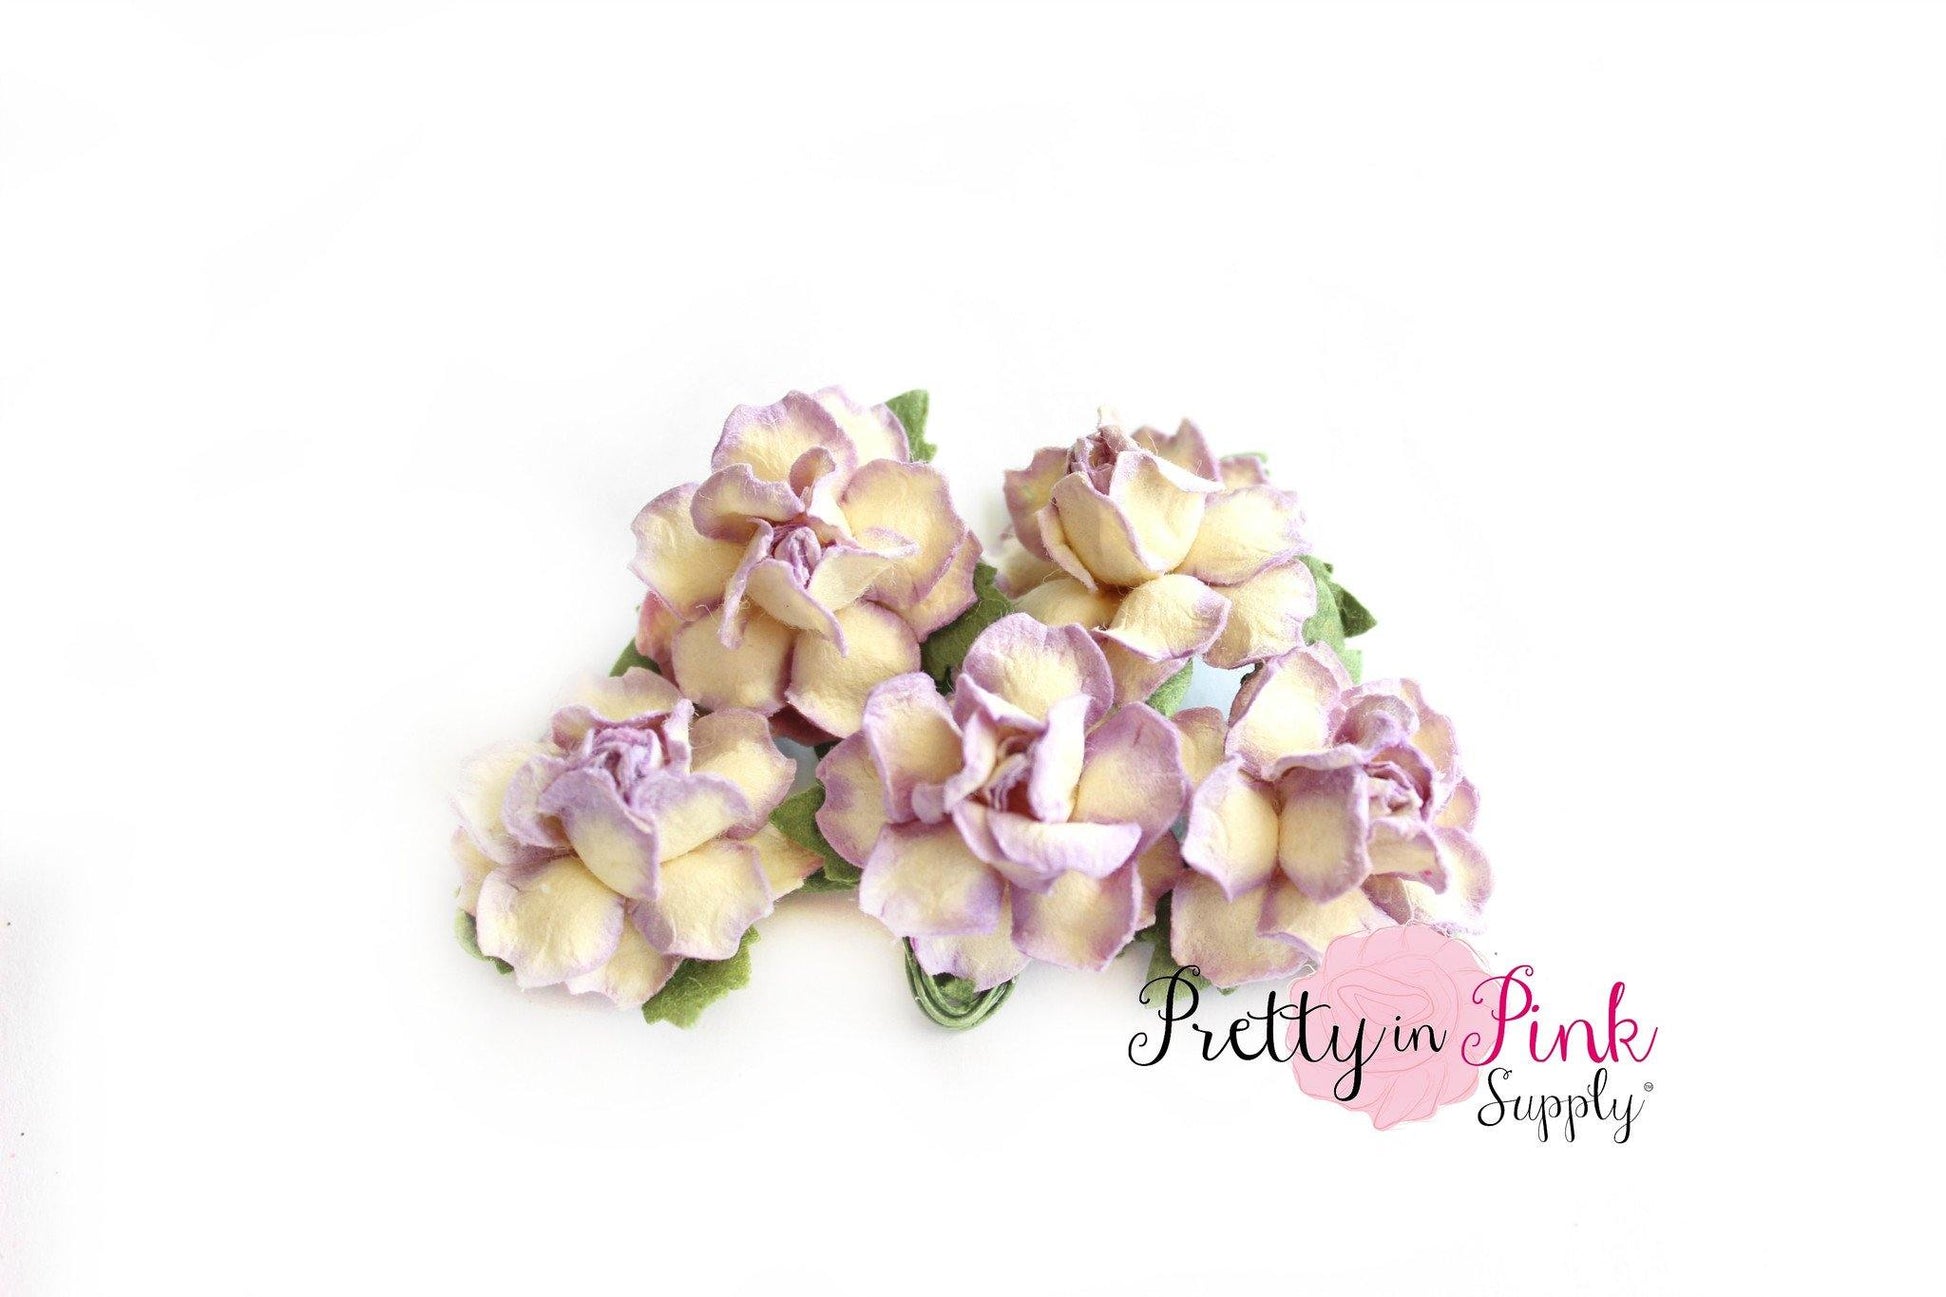 1" PREMIUM Cream with Lavender Edges Paper Flowers - Pretty in Pink Supply